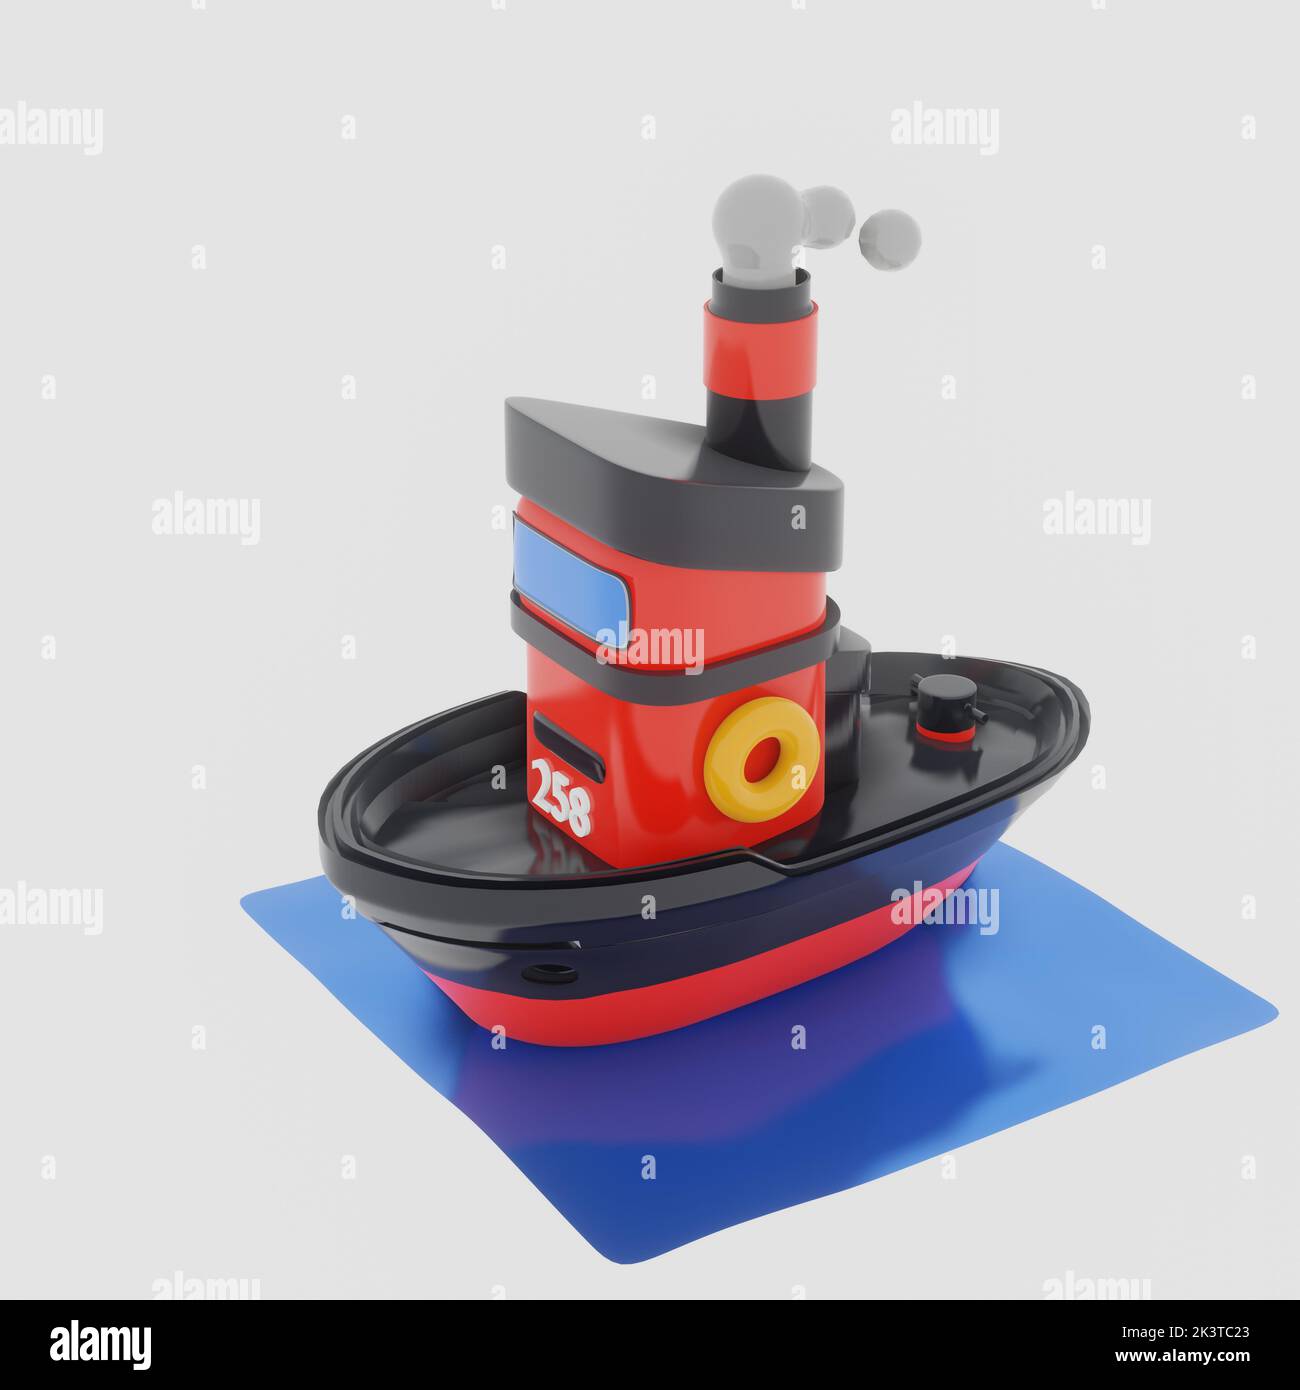 Cartoon boat toy top view 3D render image,  toy boat isolated on white background. Stock Photo